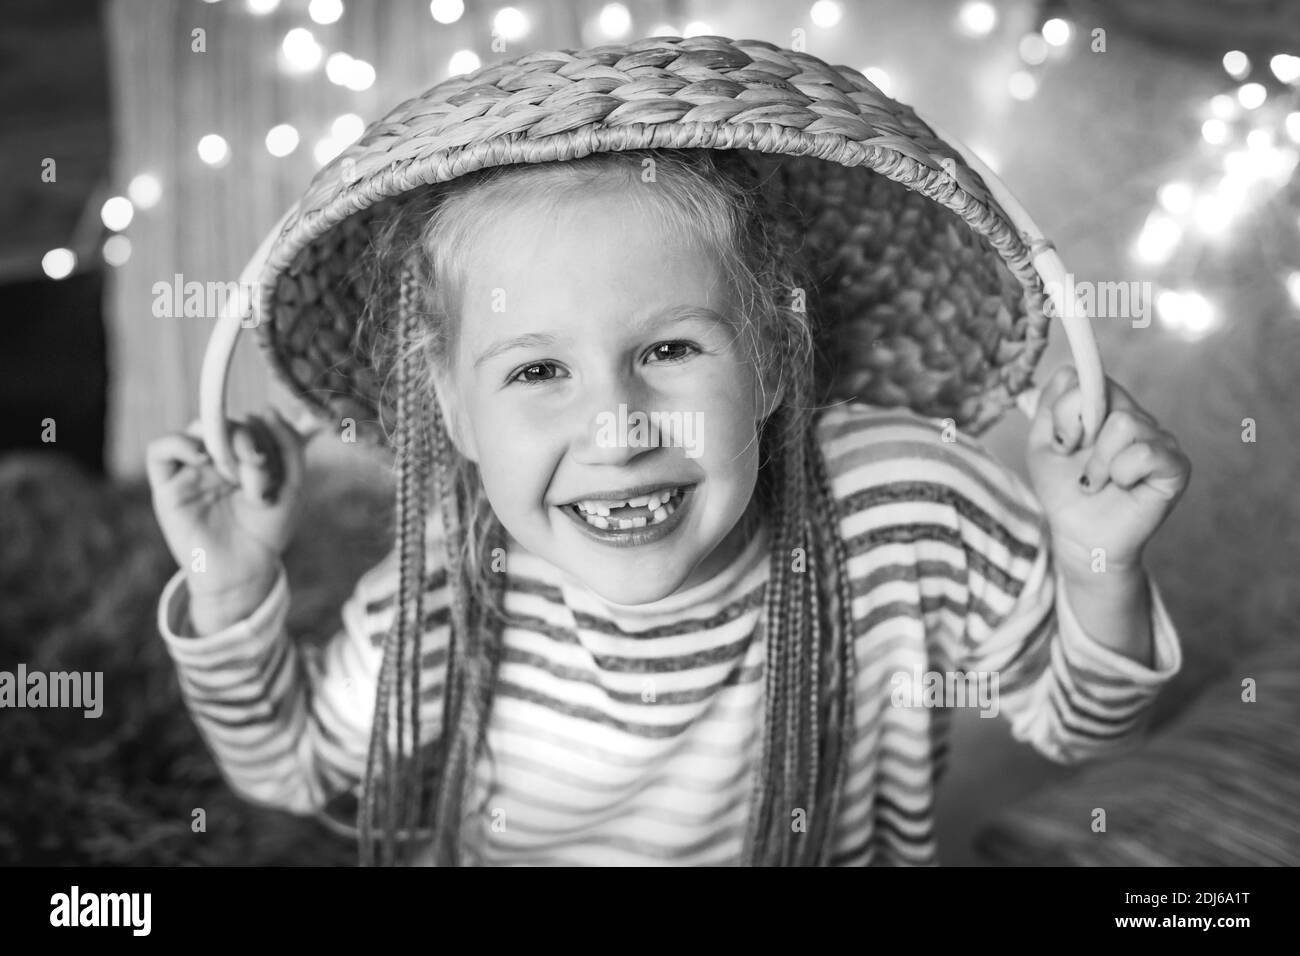 A mischievous laughing girl with pigtails and a wicker basket on her head against the background of a glowing garland. Stock Photo